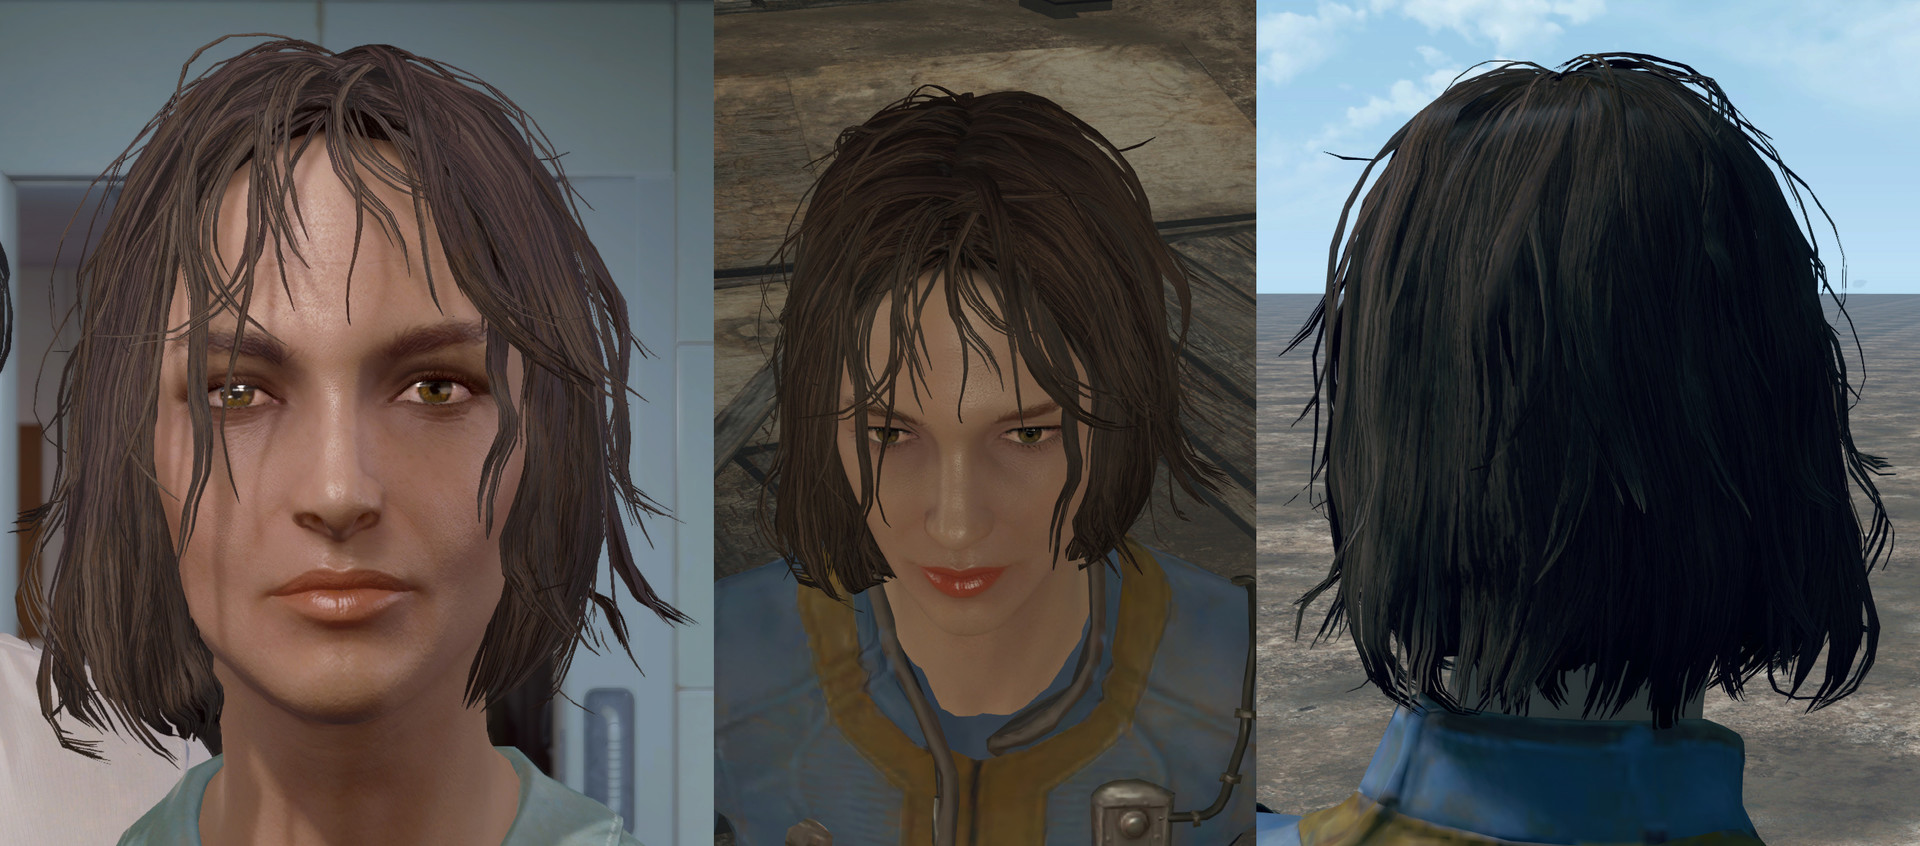 Hairstyle Magazines Fallout 4 - which haircut suits my face